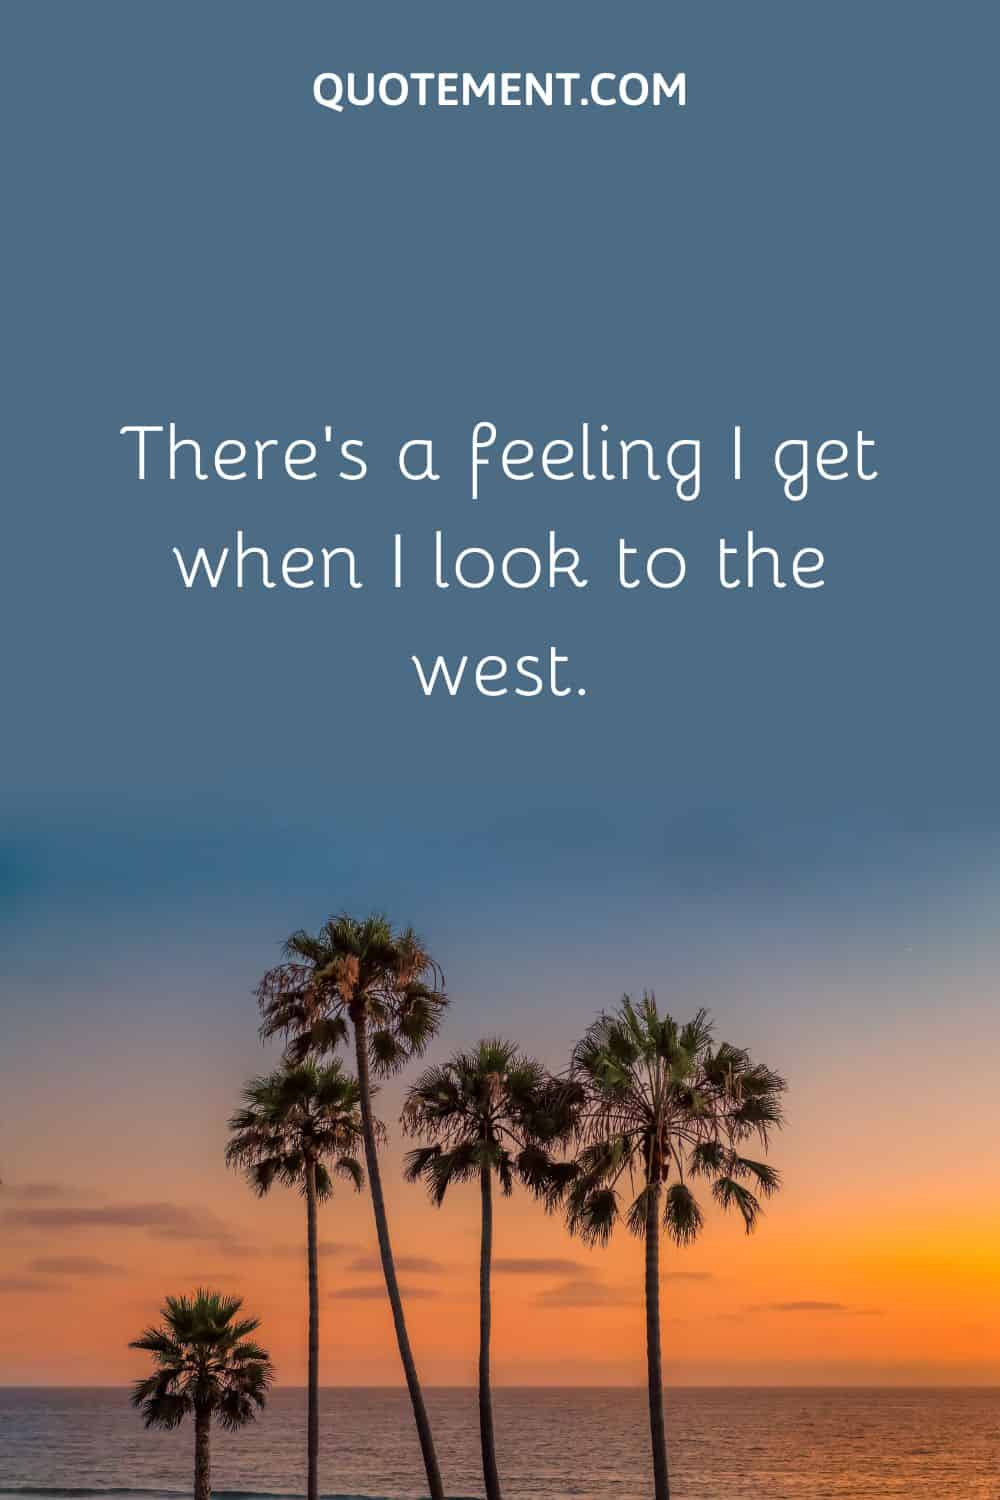 There’s a feeling I get when I look to the west